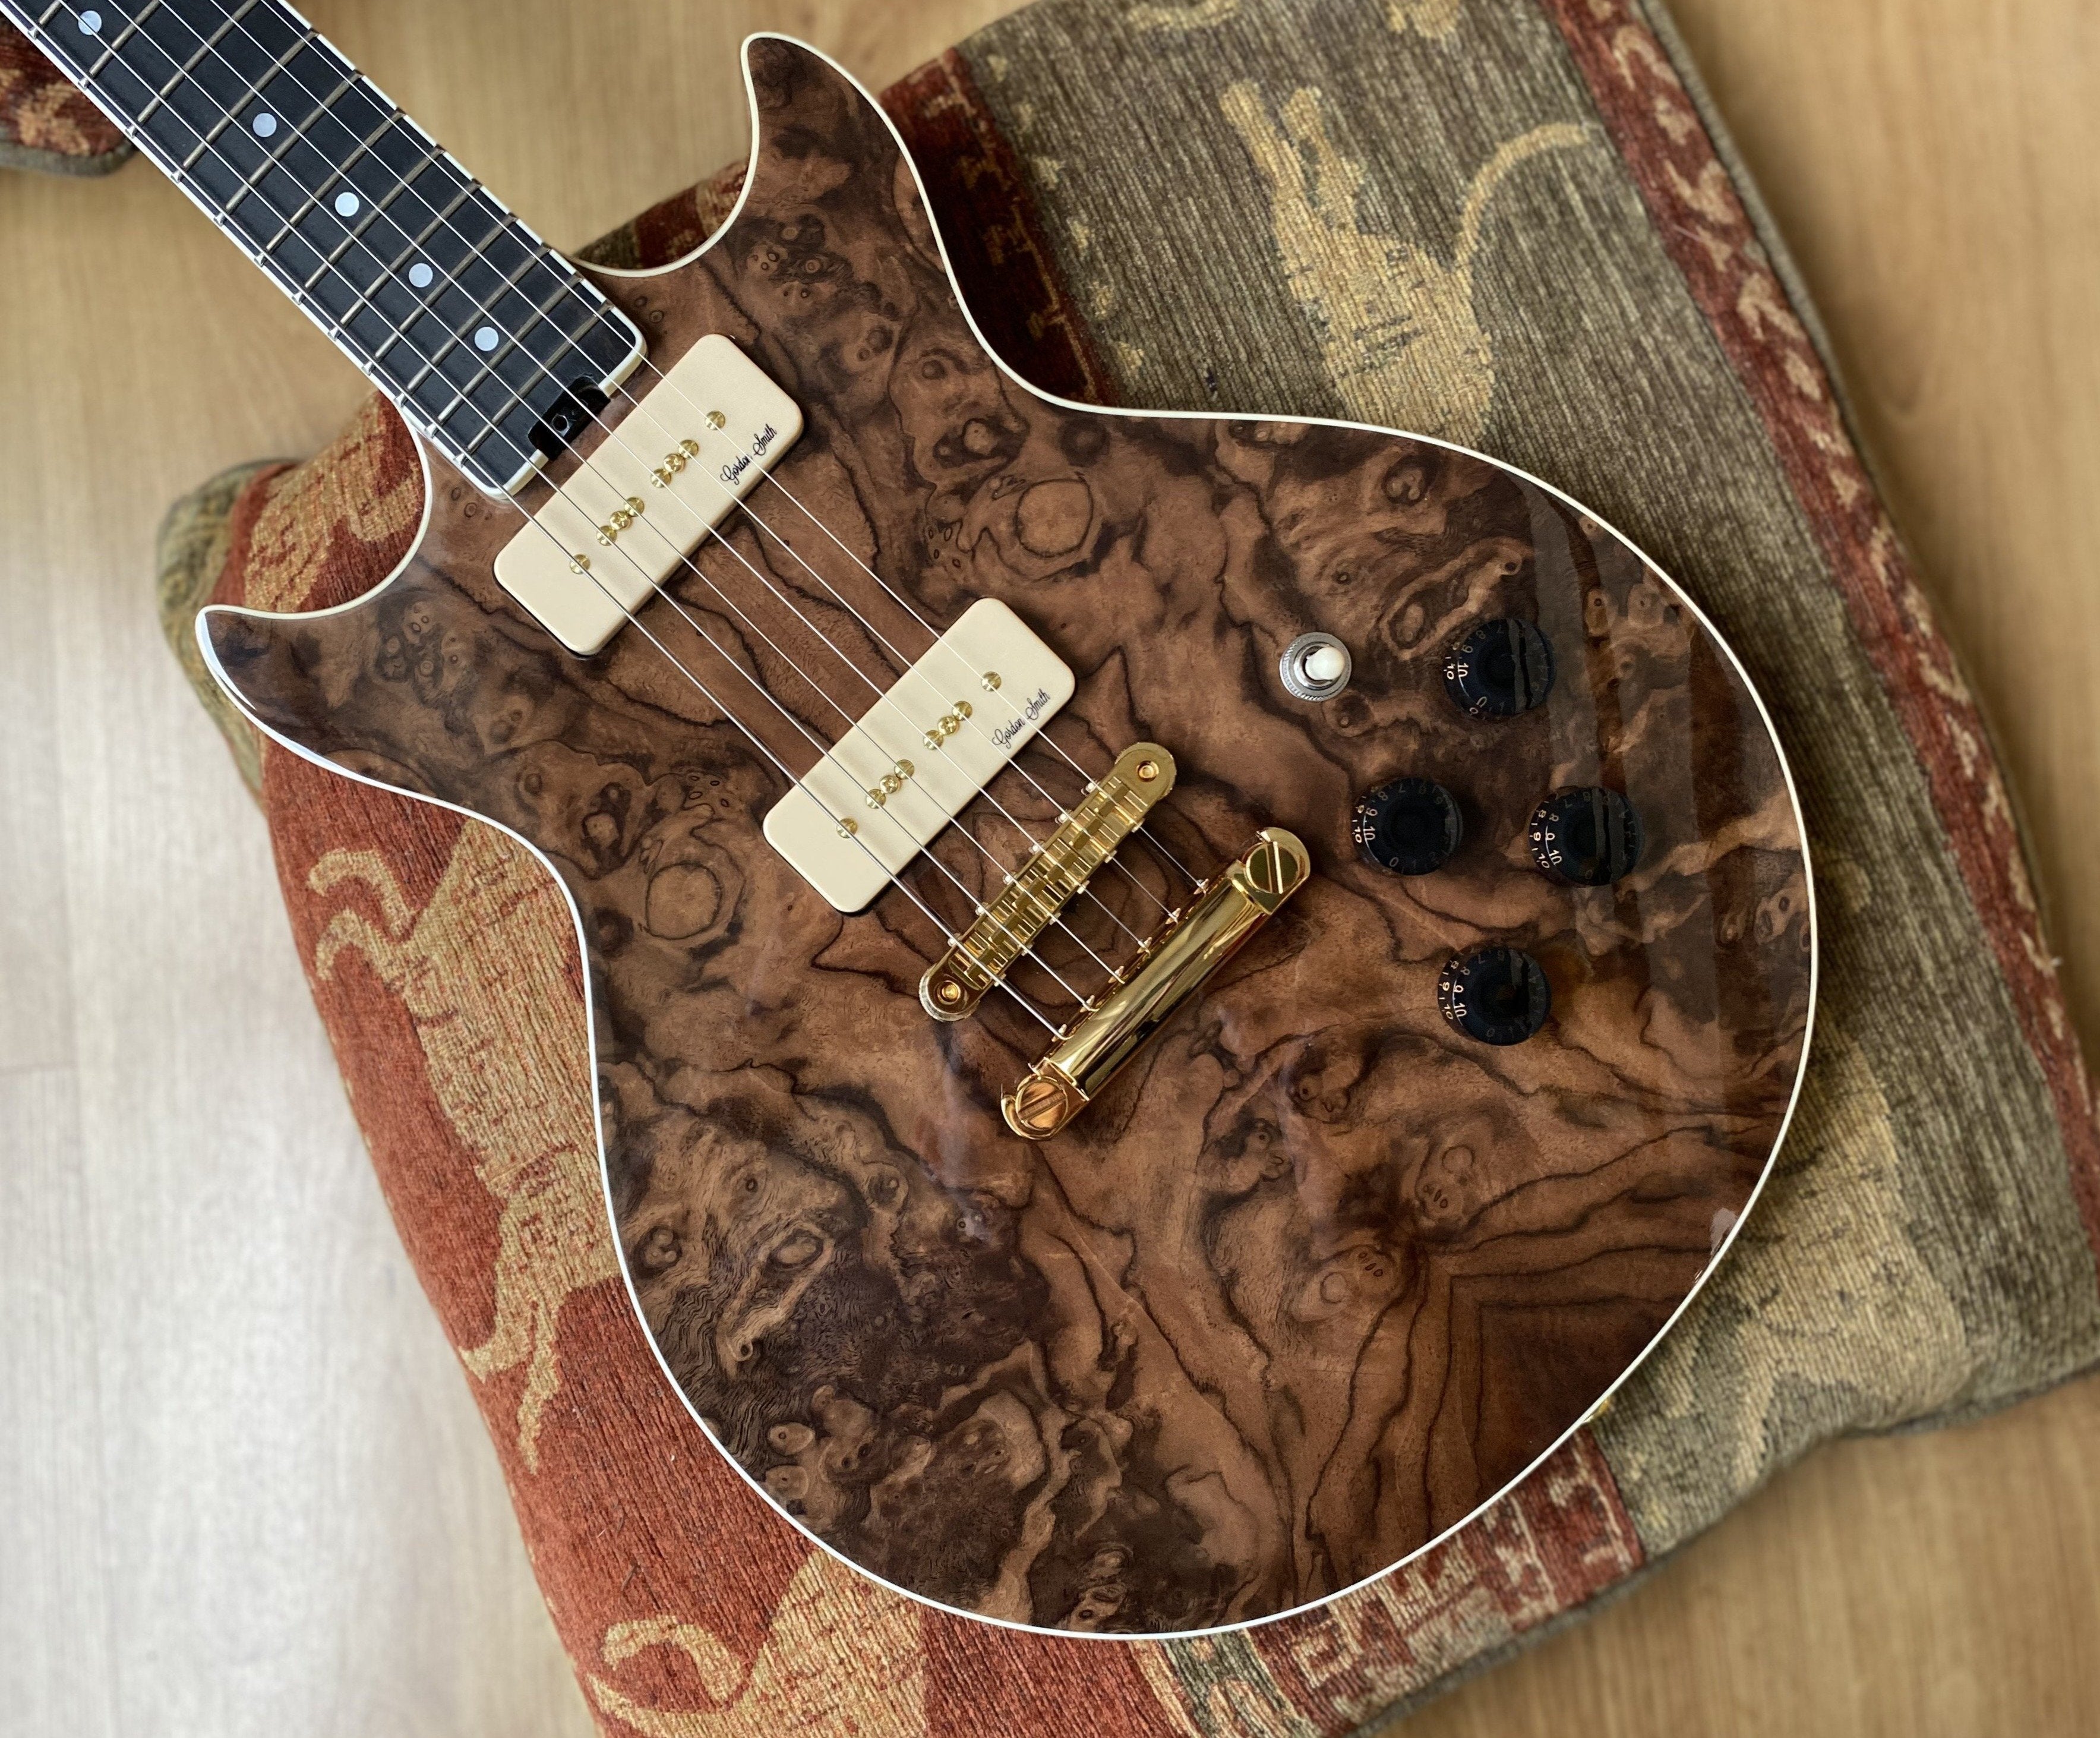 Gordon Smith GS Deluxe Burled Walnut P90 Custom, Electric Guitar for sale at Richards Guitars.